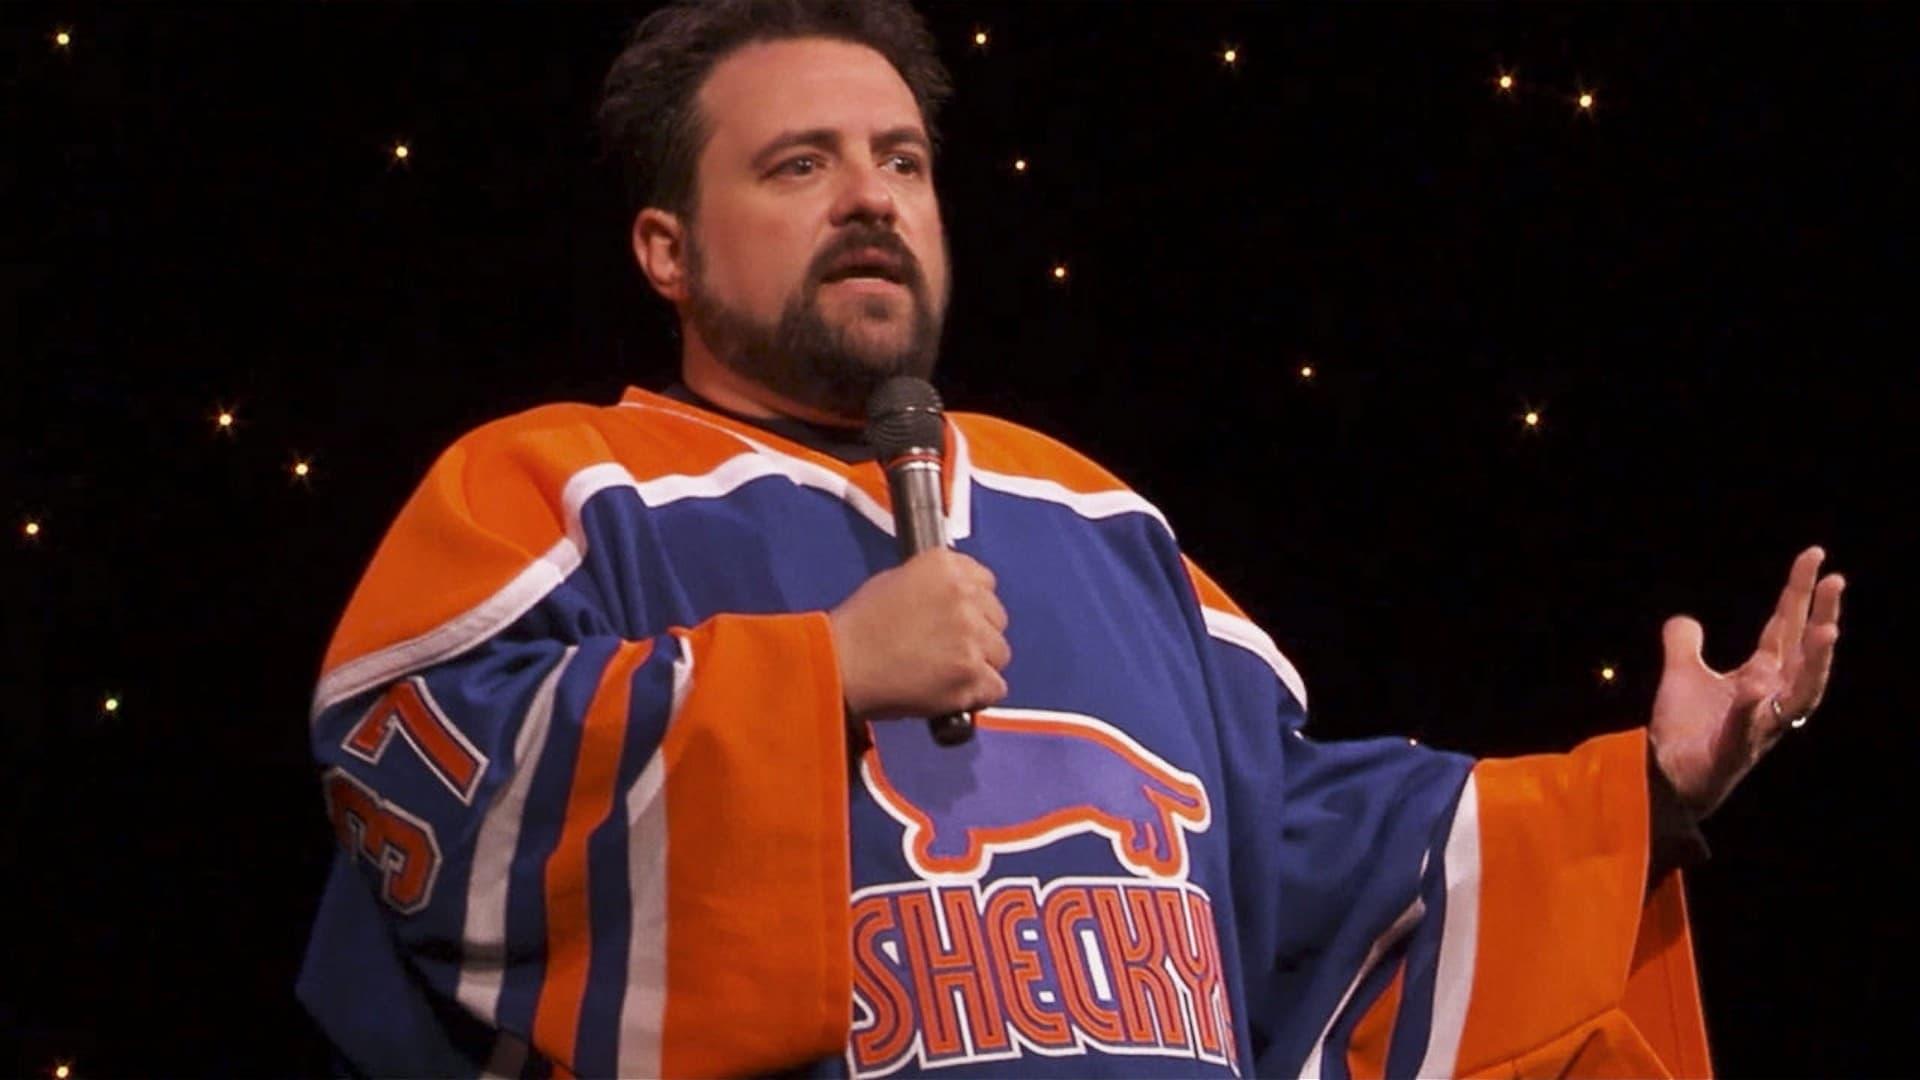 Kevin Smith: Burn in Hell backdrop